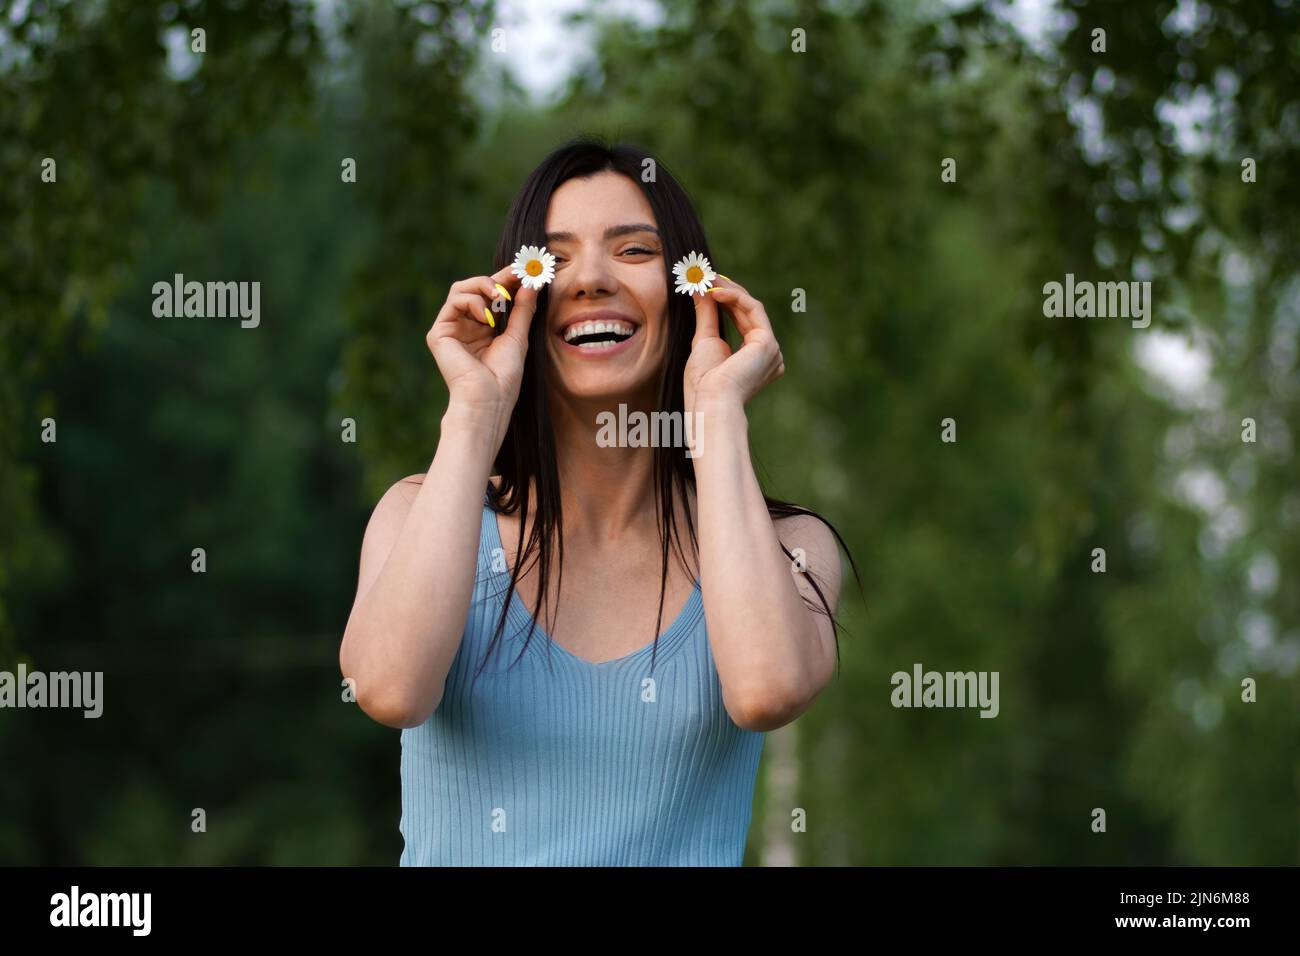 Beautiful Young Female Smiling and Holding Daisies. Bright Portrait Stock Photo